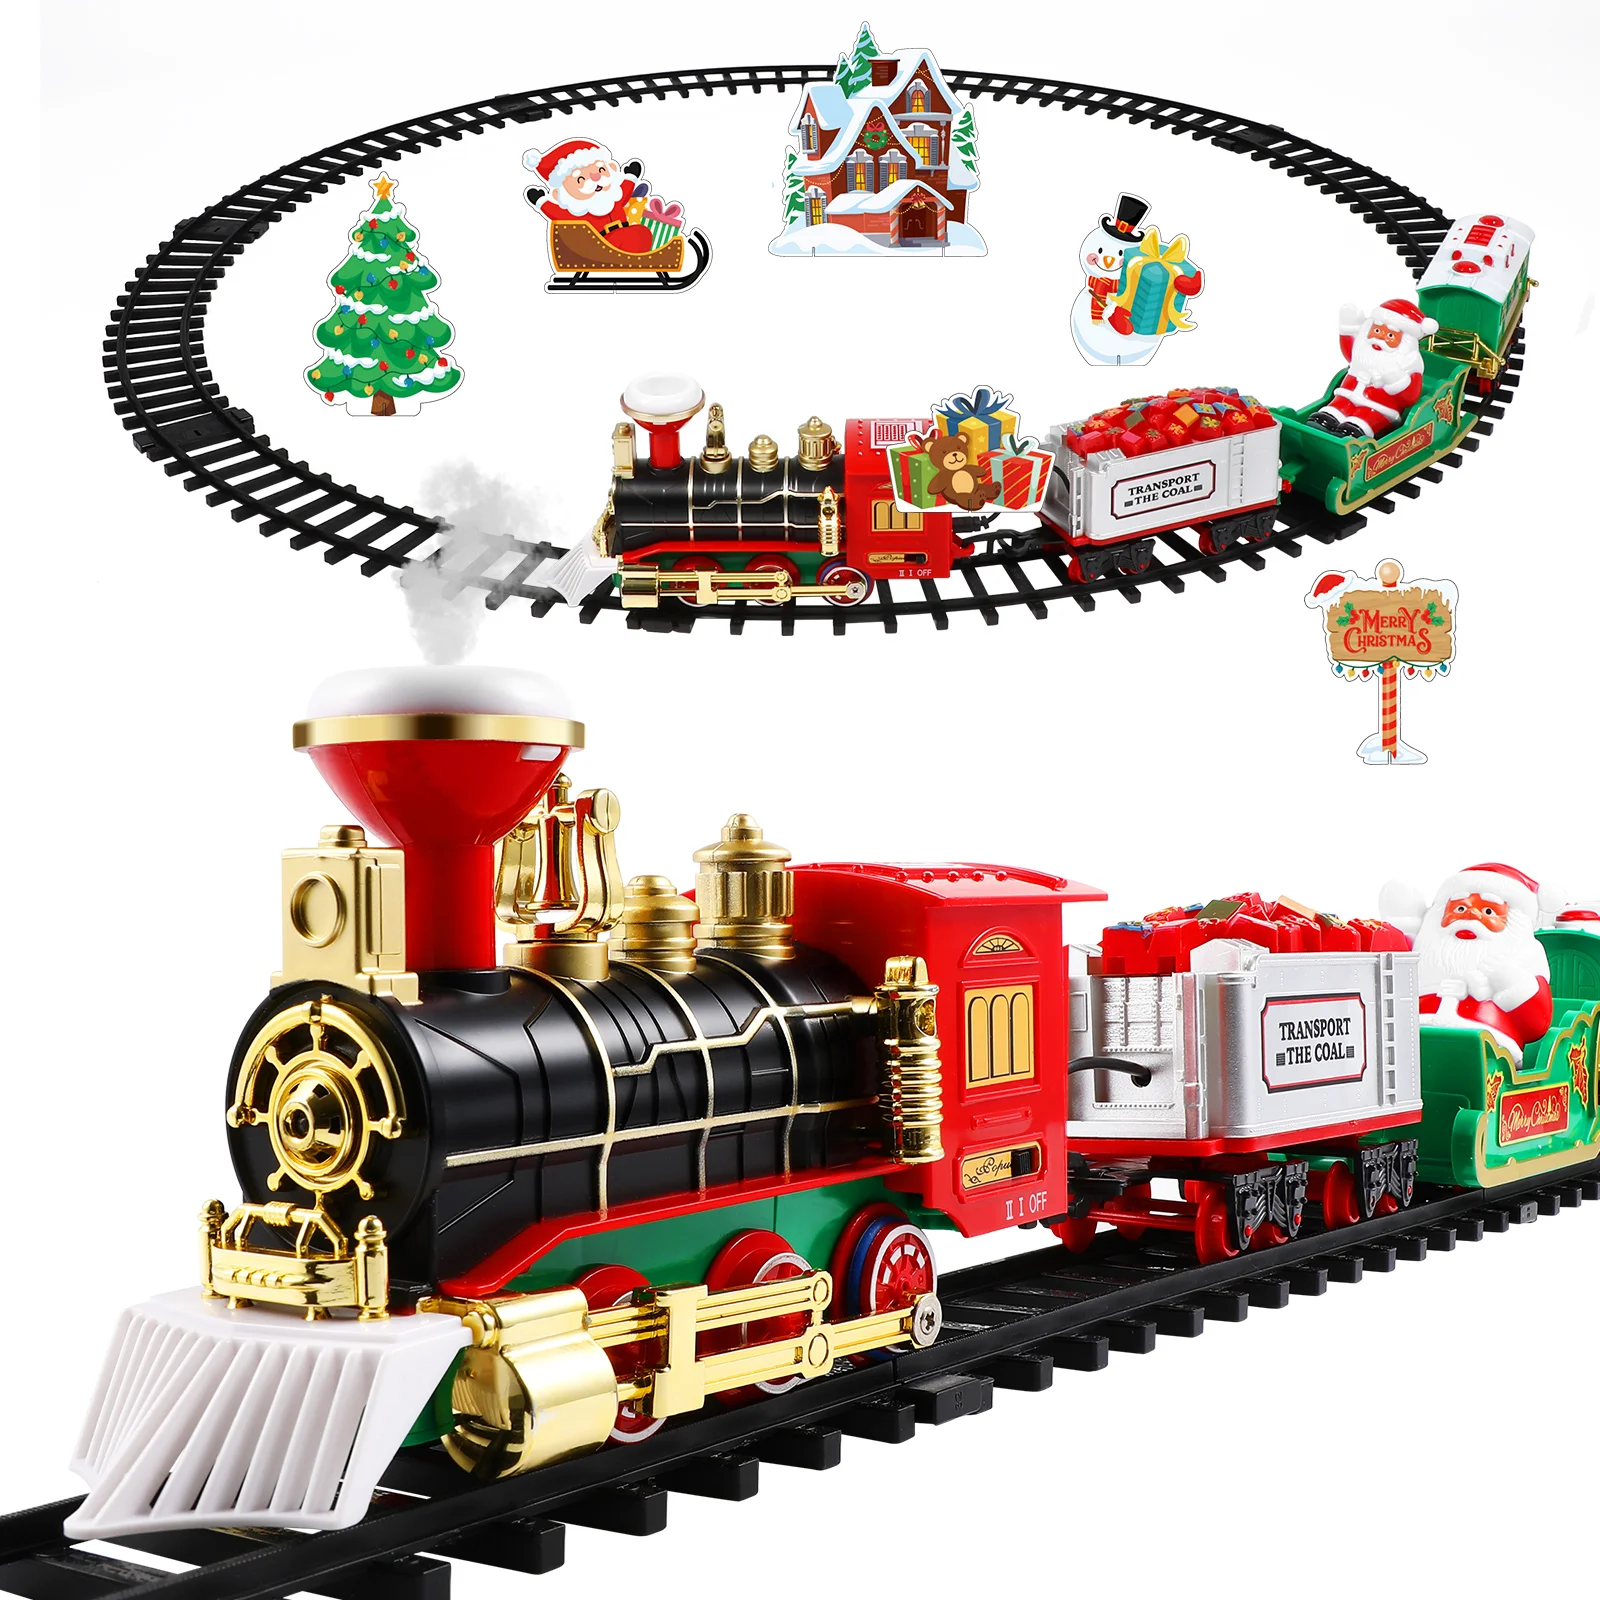 Electric Christmas Train Model Railway Tracks Toy With Sound Light Powered For Kids Birthday Party Gift toyvian railway funny freight train water steam locomotive playset with smoke simulation model electric tracks toys kids gift